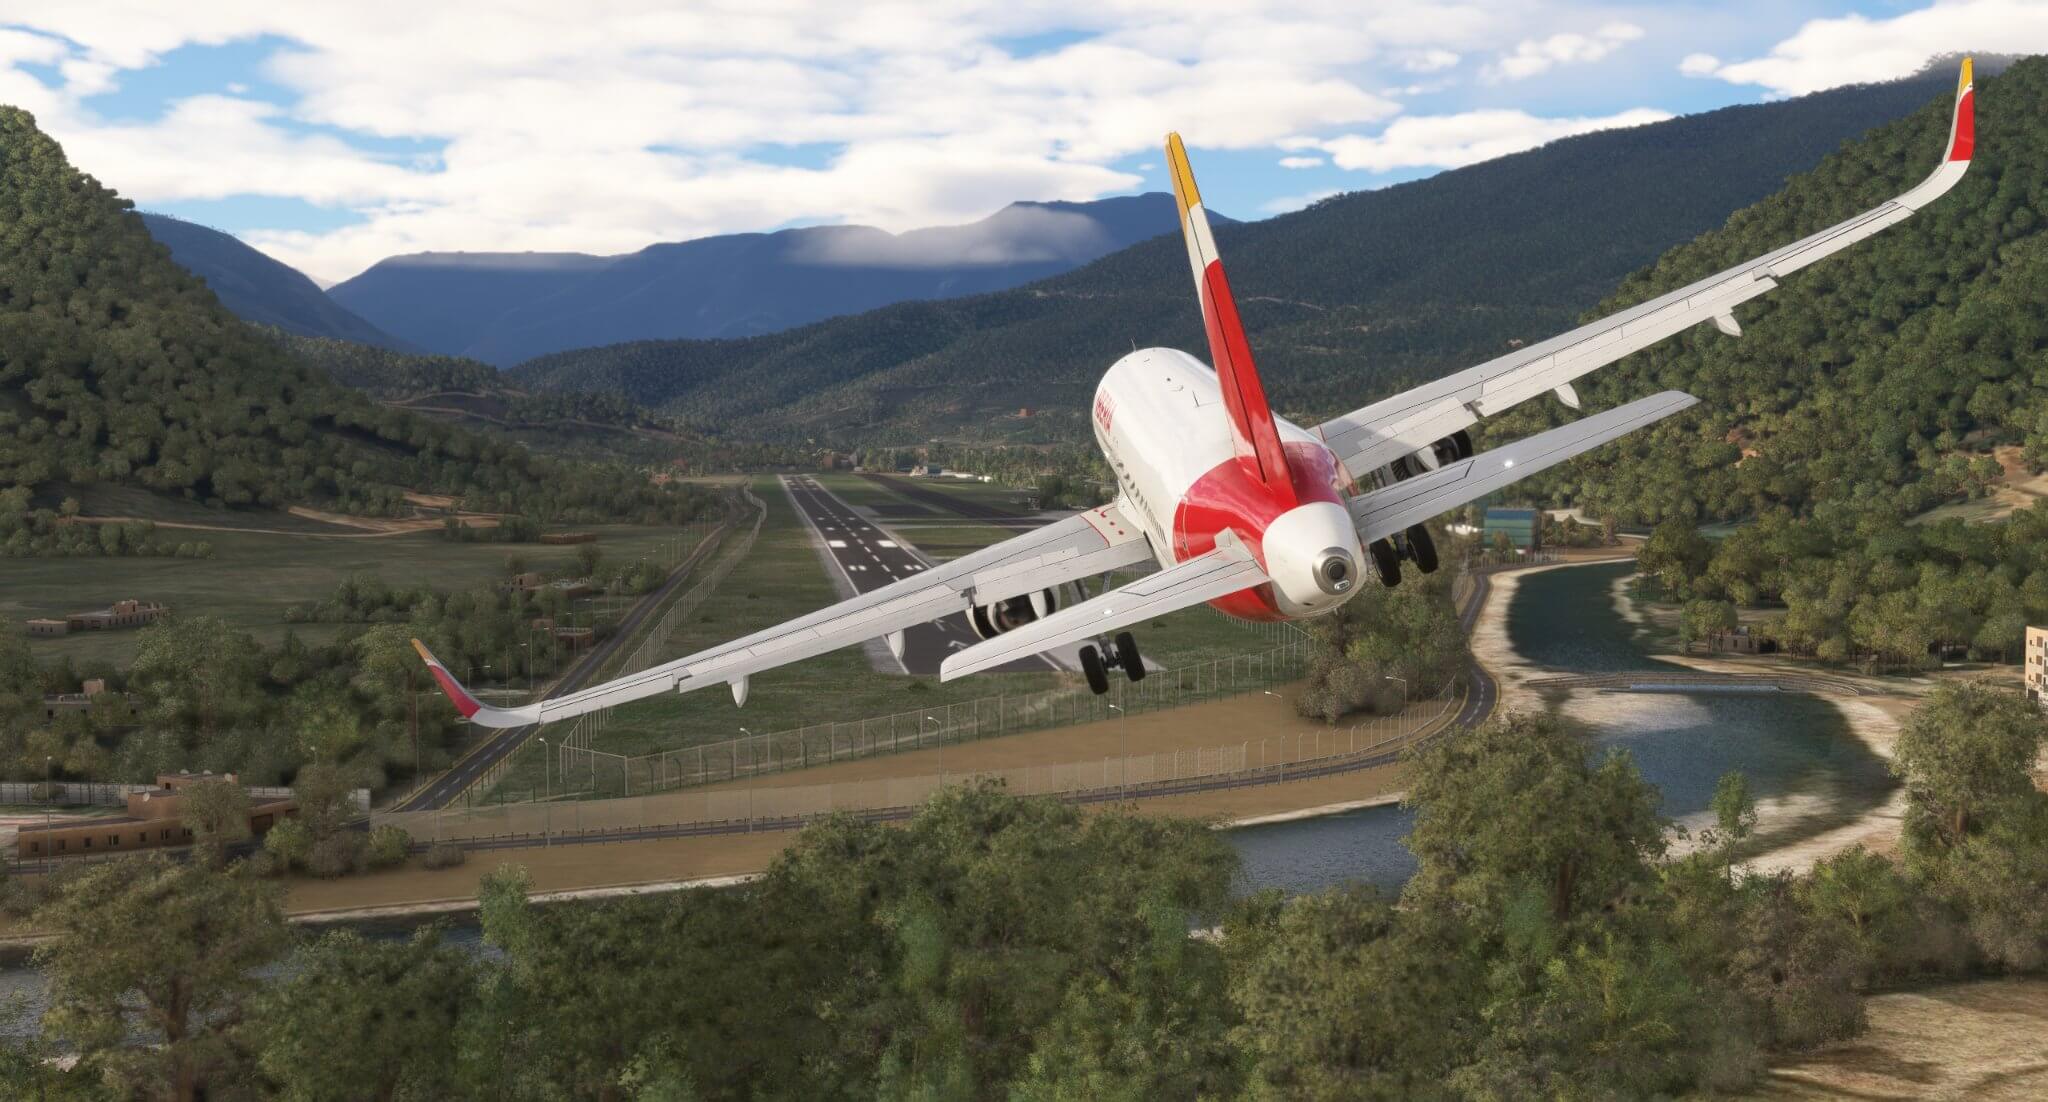 An Iberia Airbus A320 NEO banks left to line up with a short runway located in a valley.